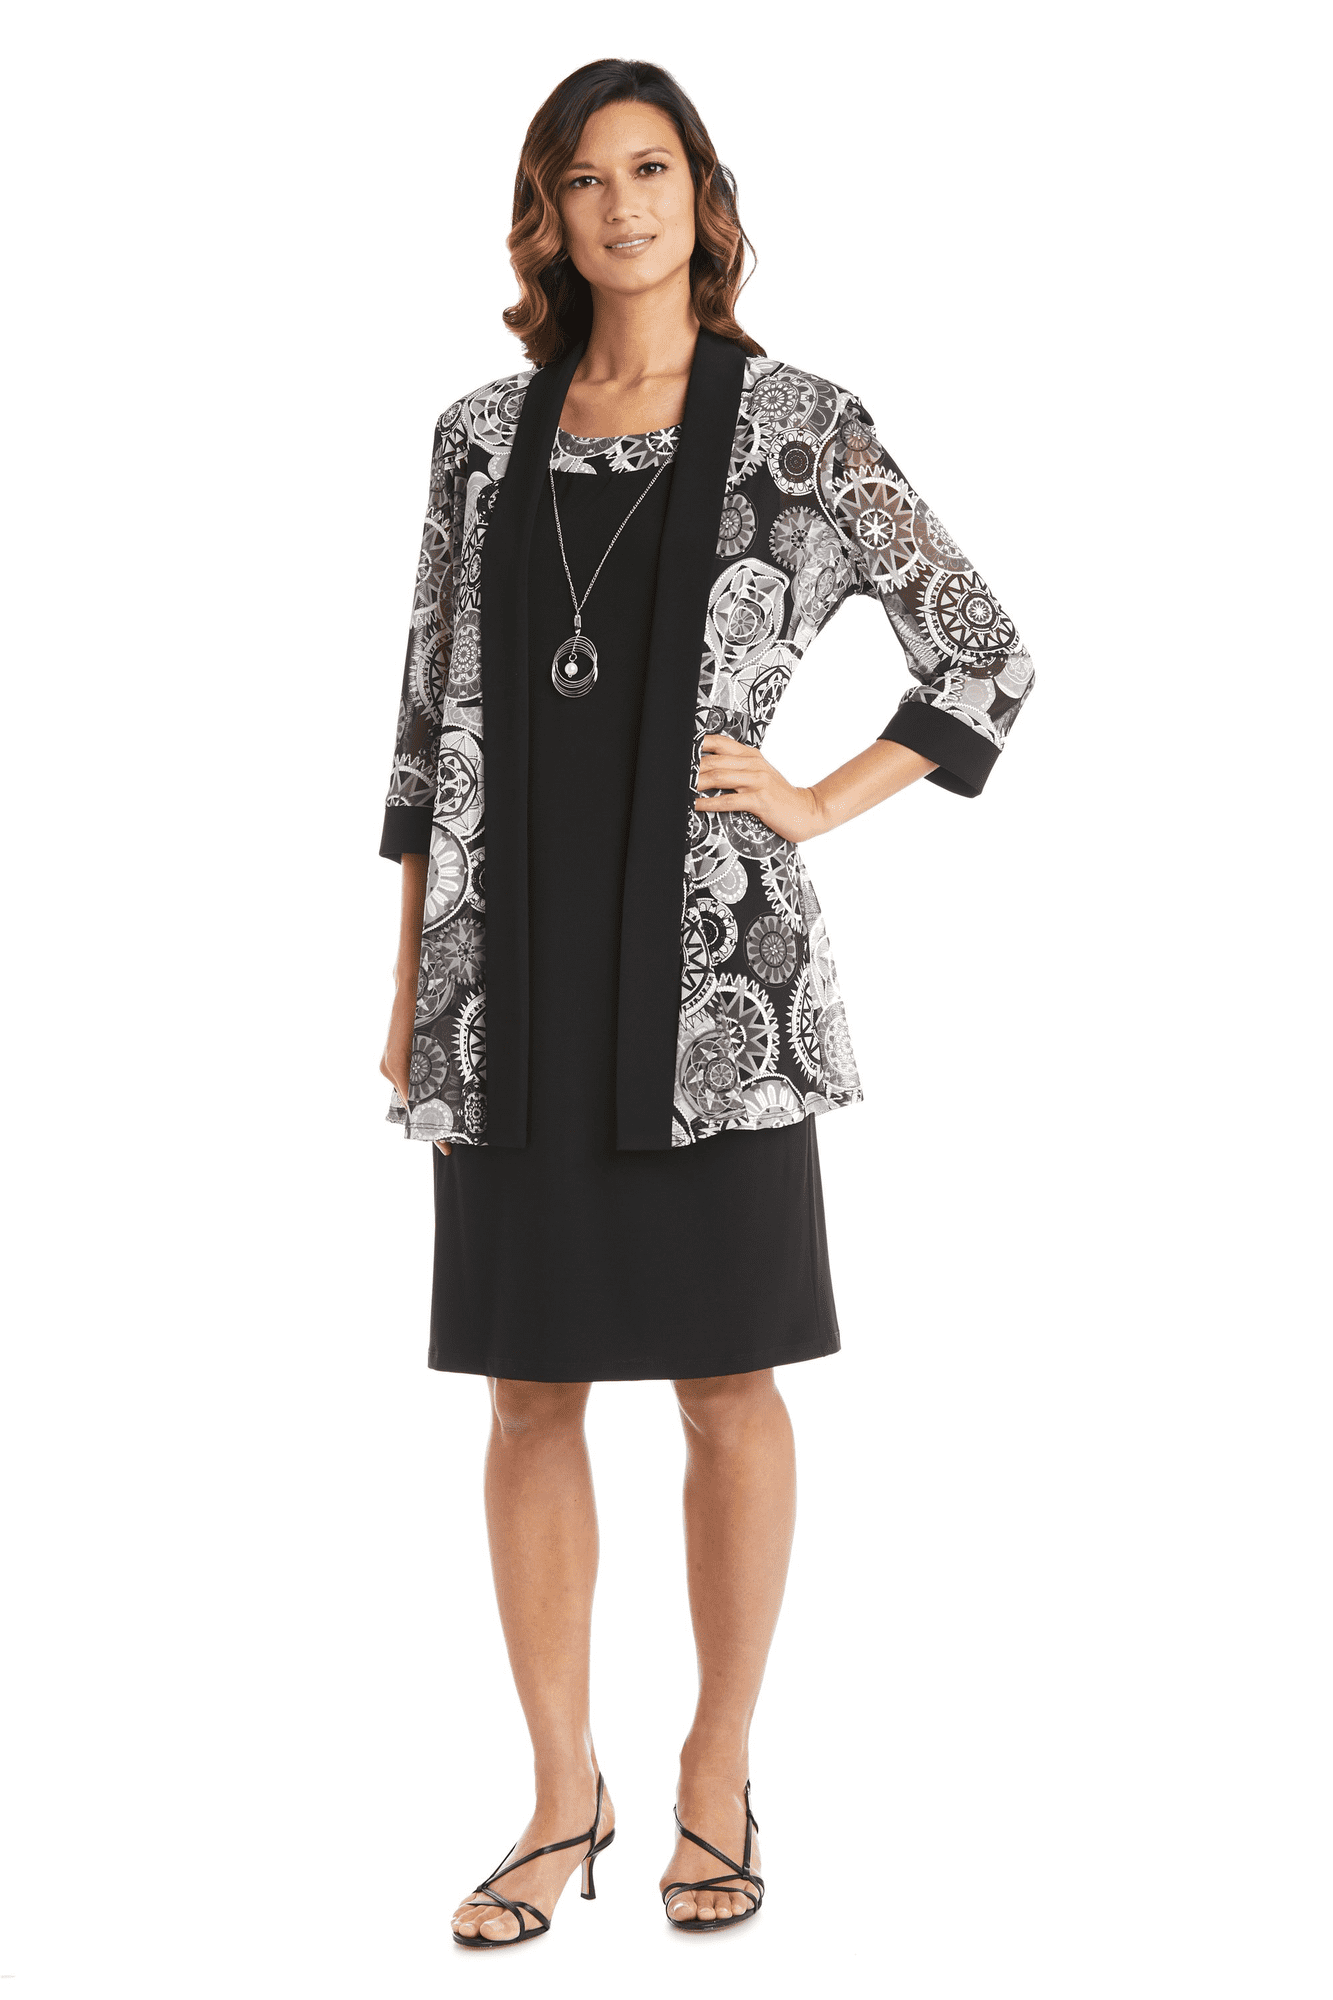 RM Richards Women's Two-Piece Printed Jacket and Dress Set Petite 